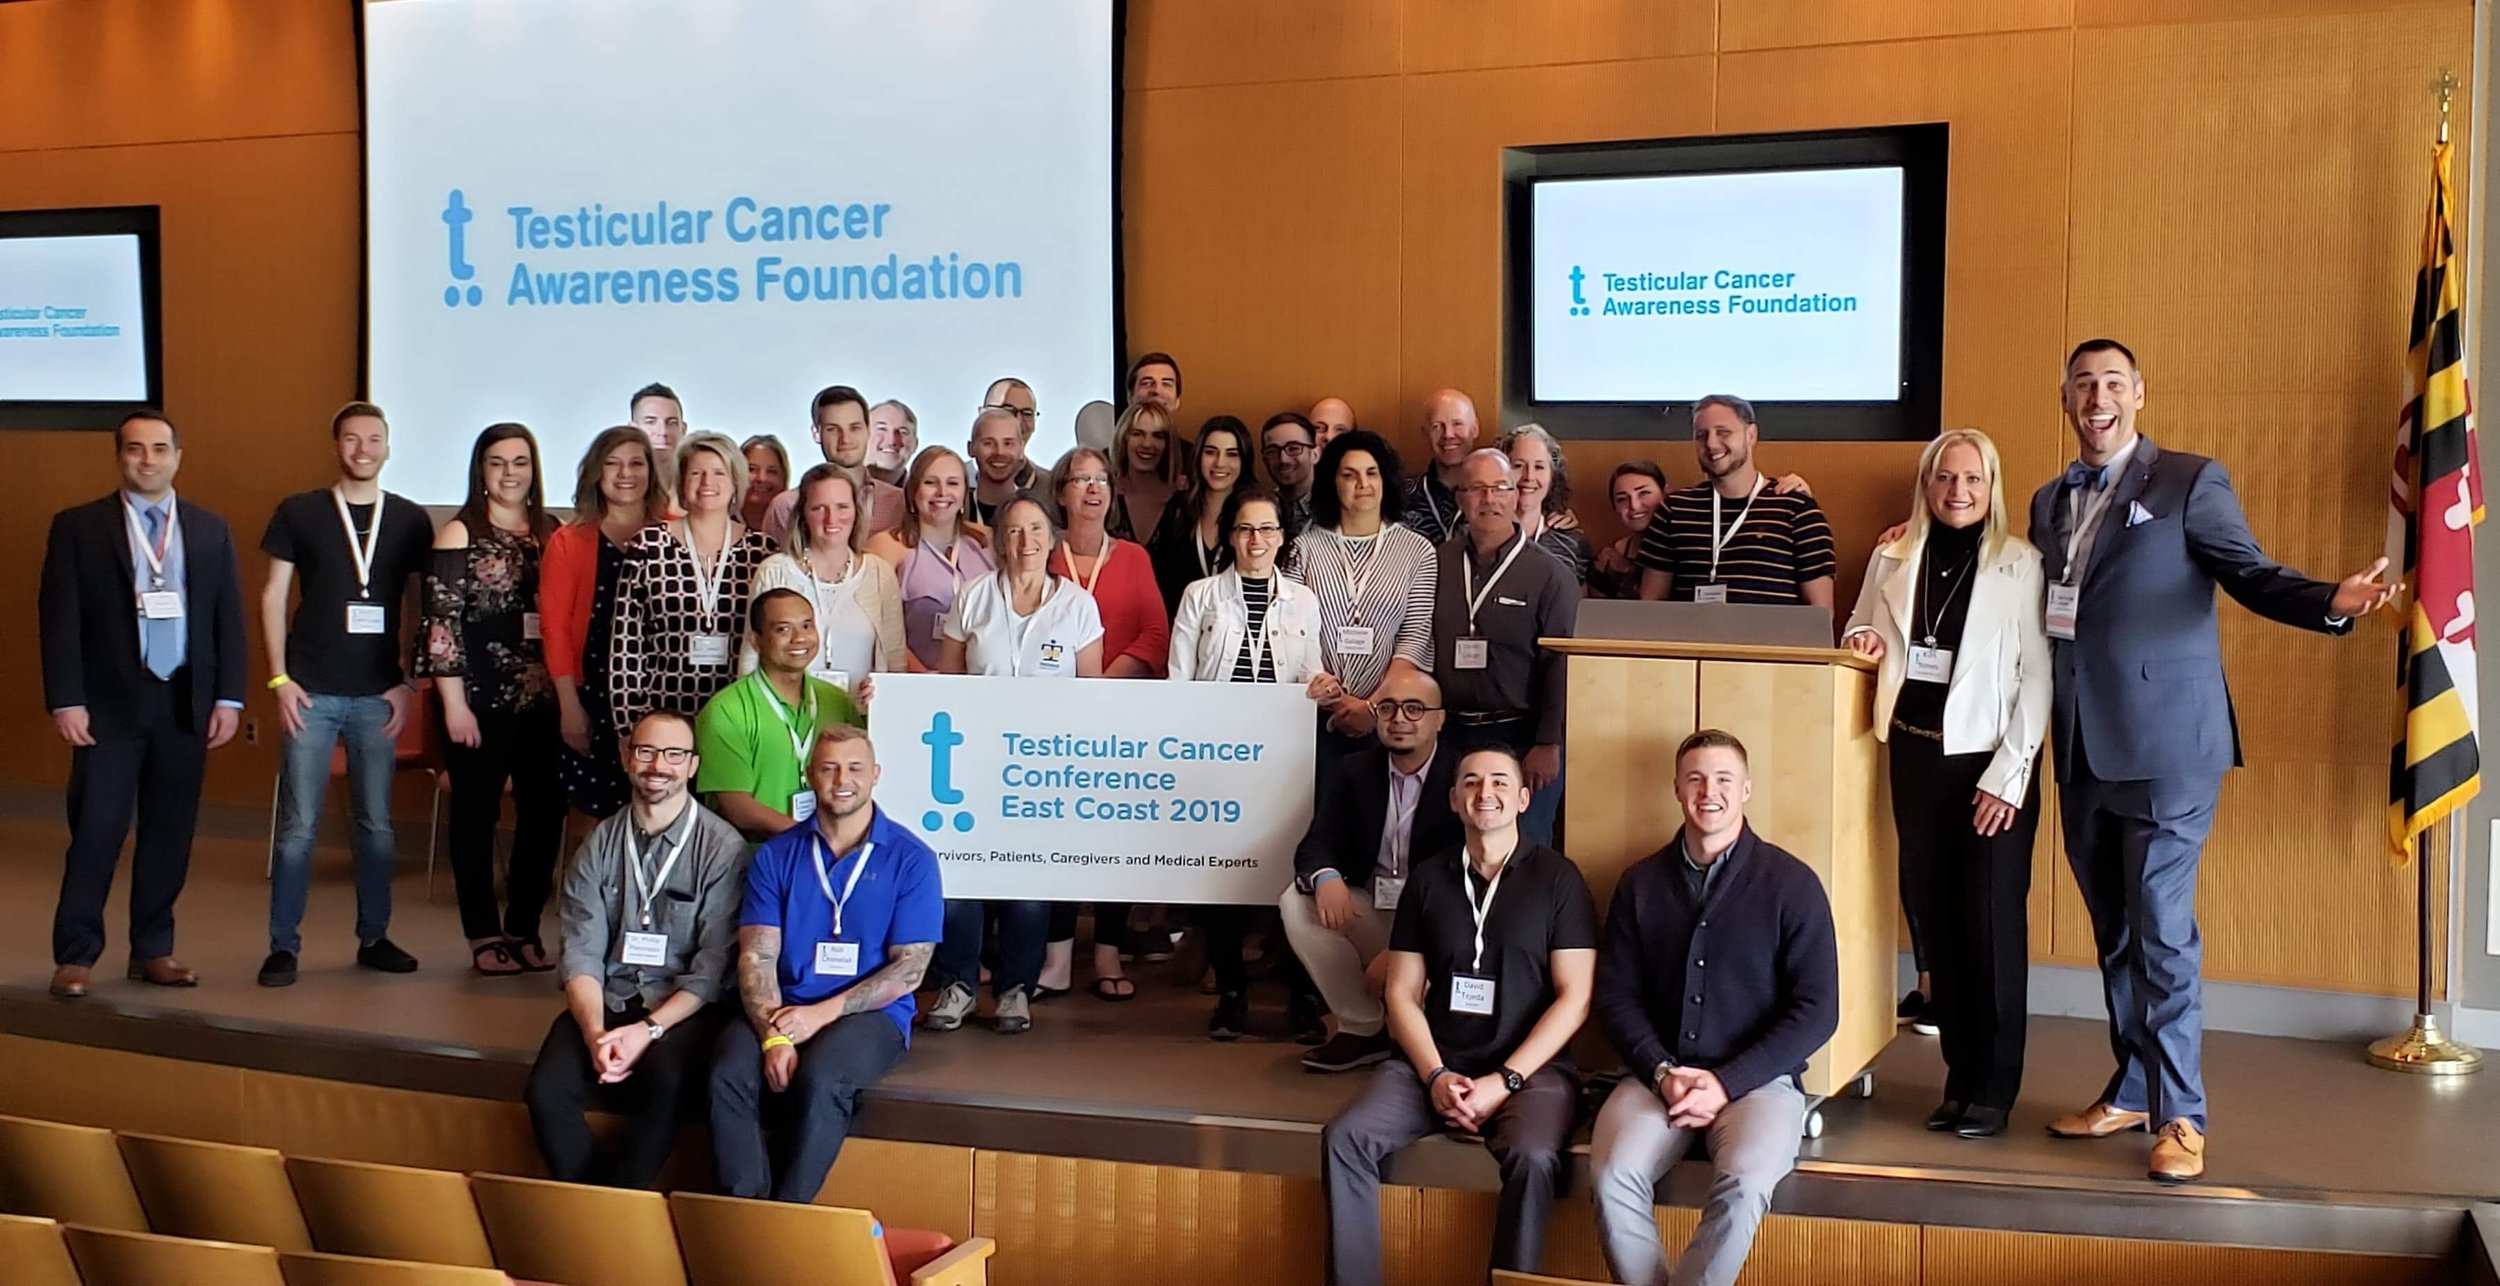 Testicular Cancer Conference 2019 Group Photo